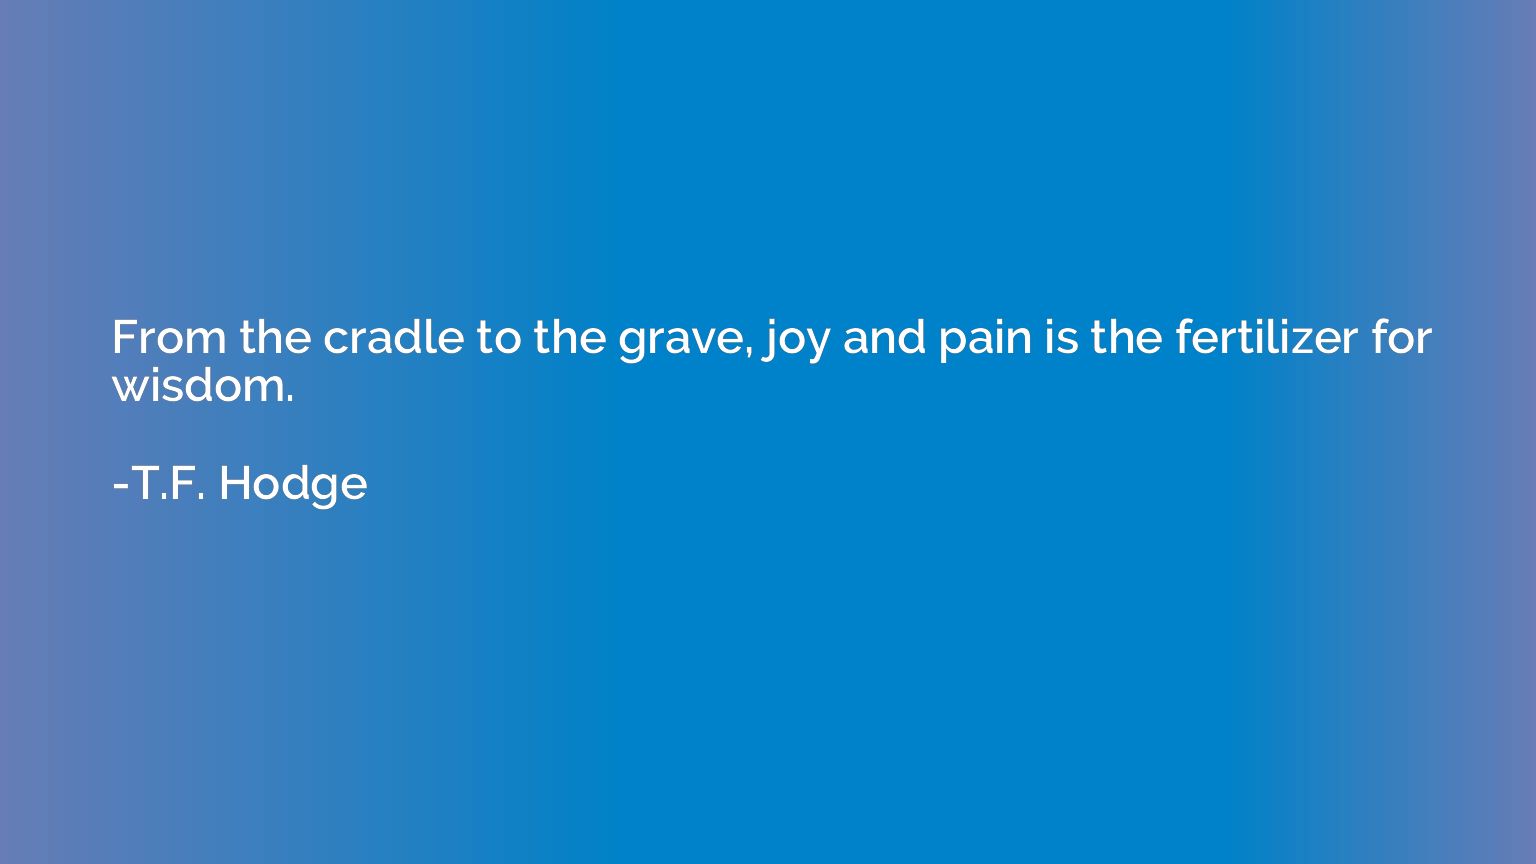 From the cradle to the grave, joy and pain is the fertilizer